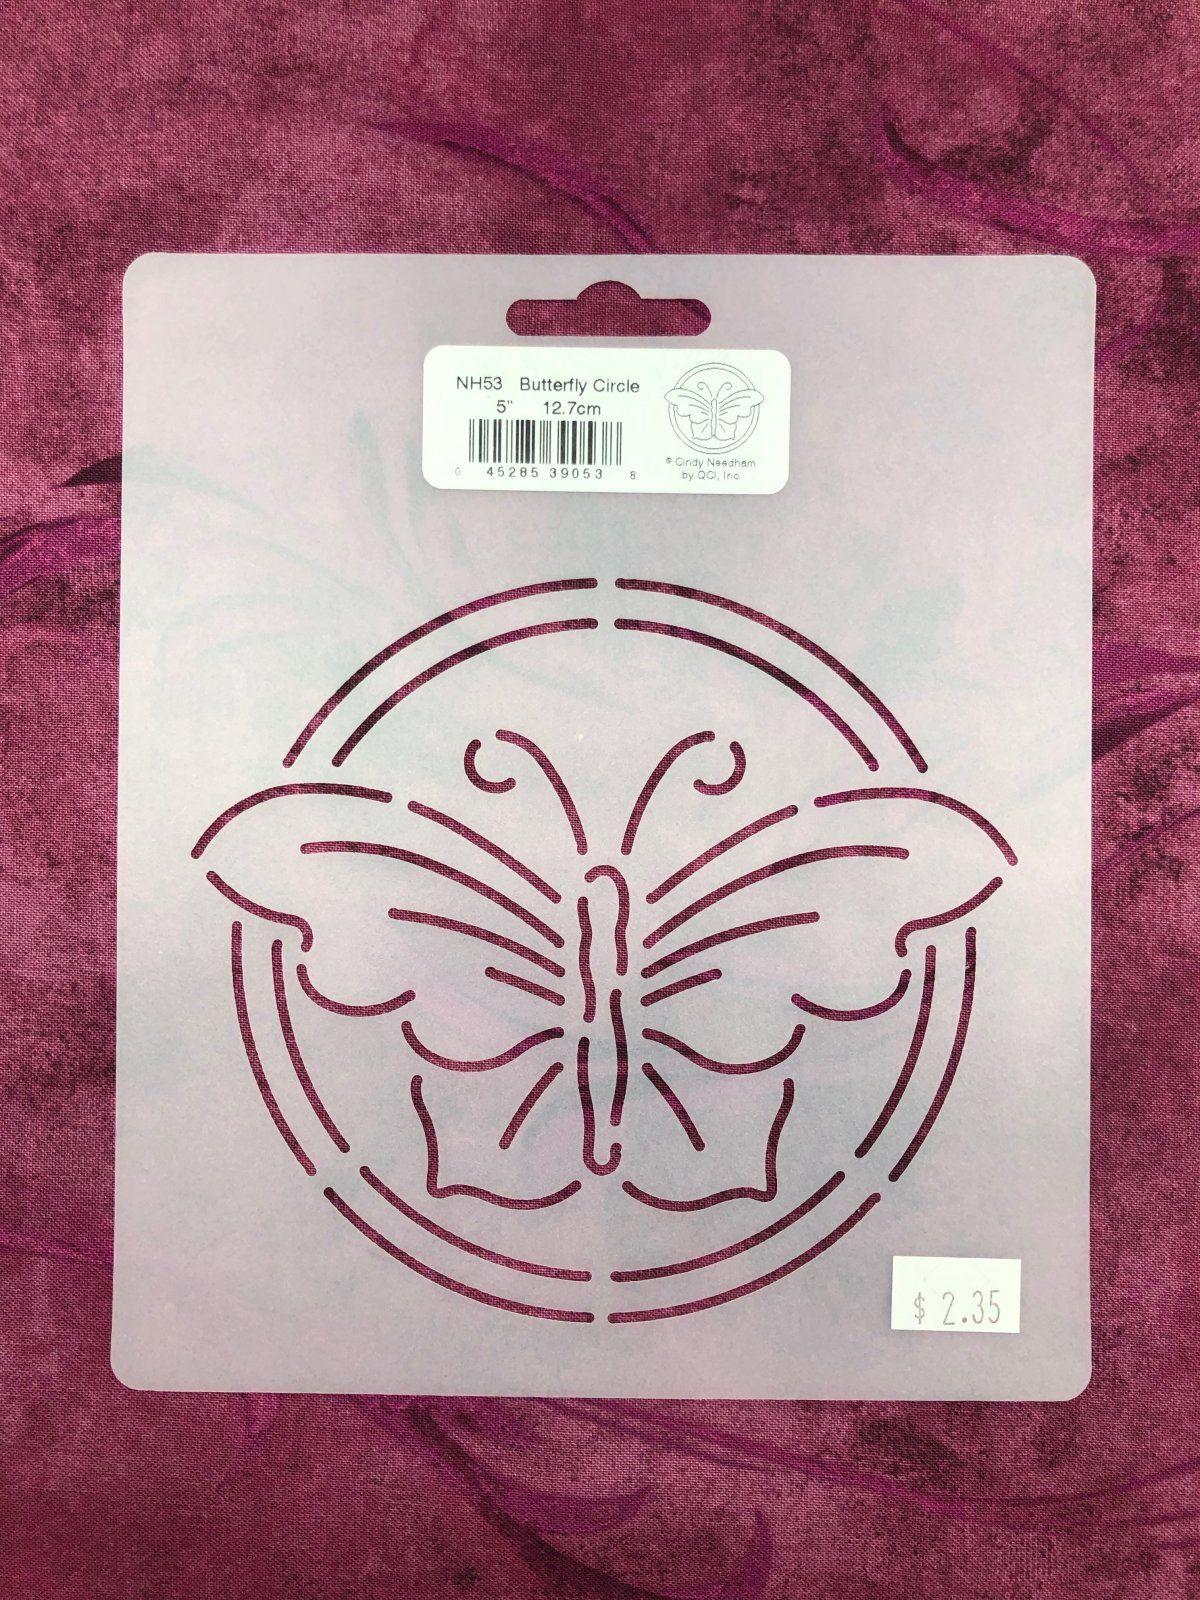 Butterfly Circle Logo - NH53 Butterfly Circle 5 Inch Stencil